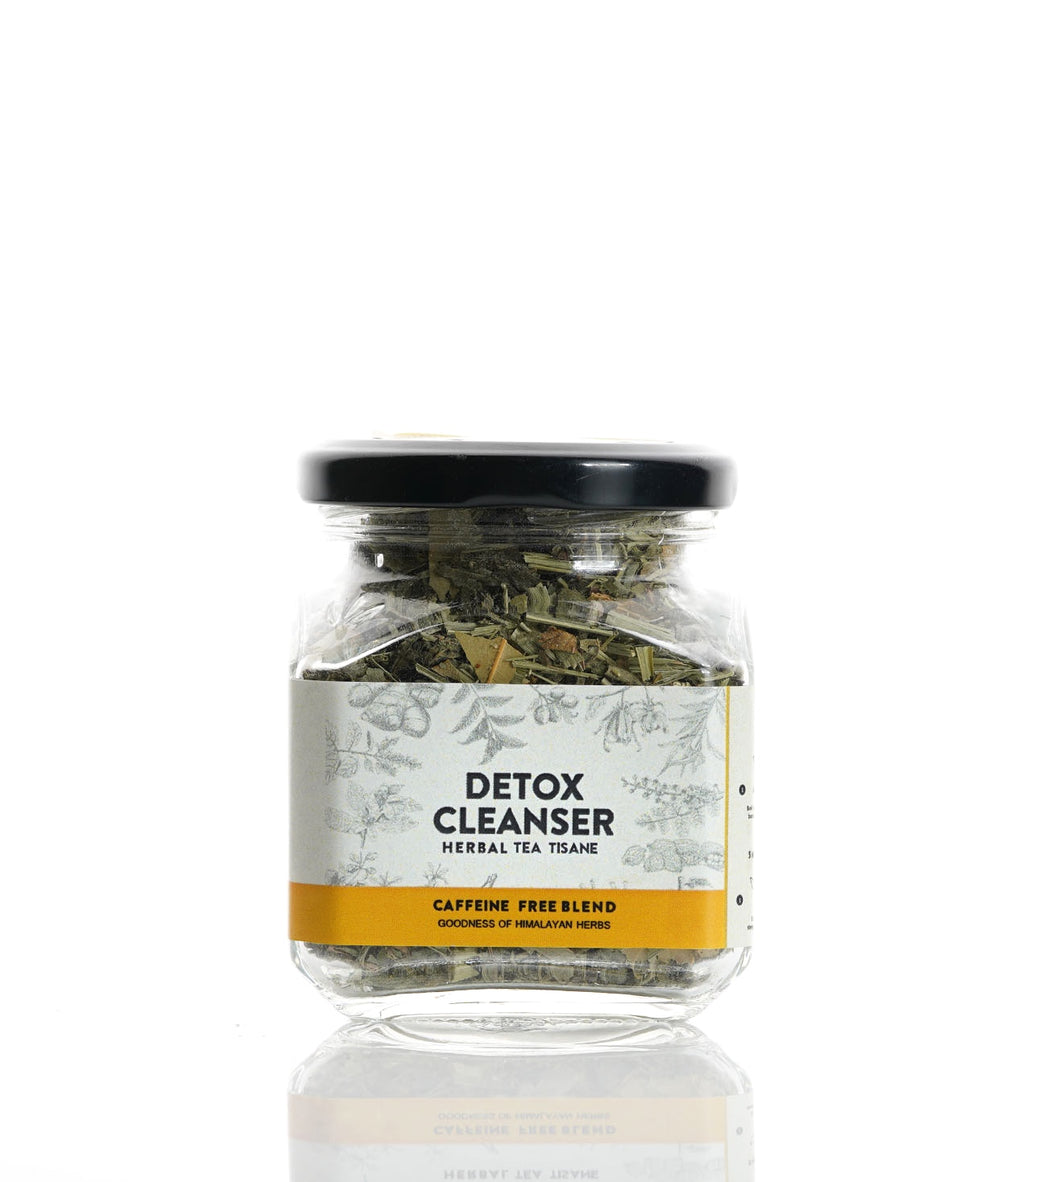 Detox cleanser Herbal Infusion